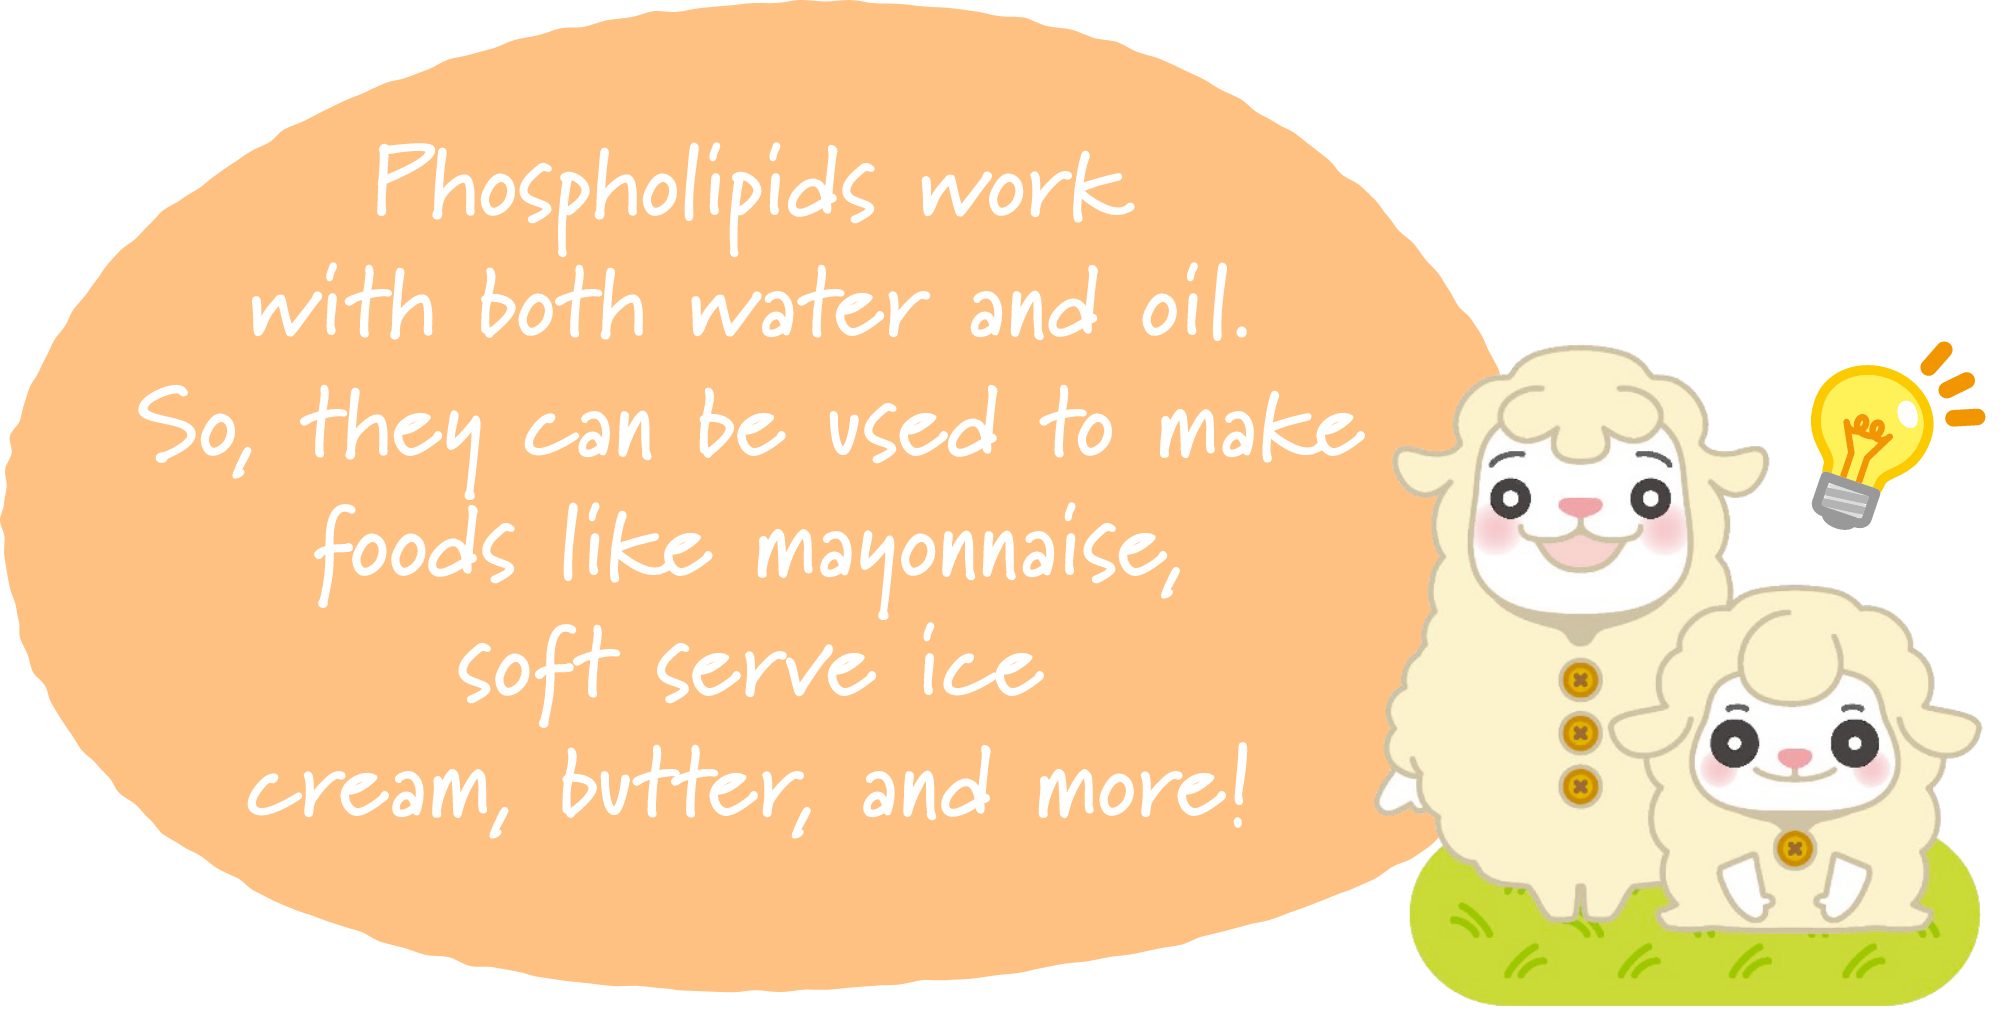 Phospholipids are compatible with water and oil, which helps make mayonnaise, soft serve ice cream, butter, and many other foods!